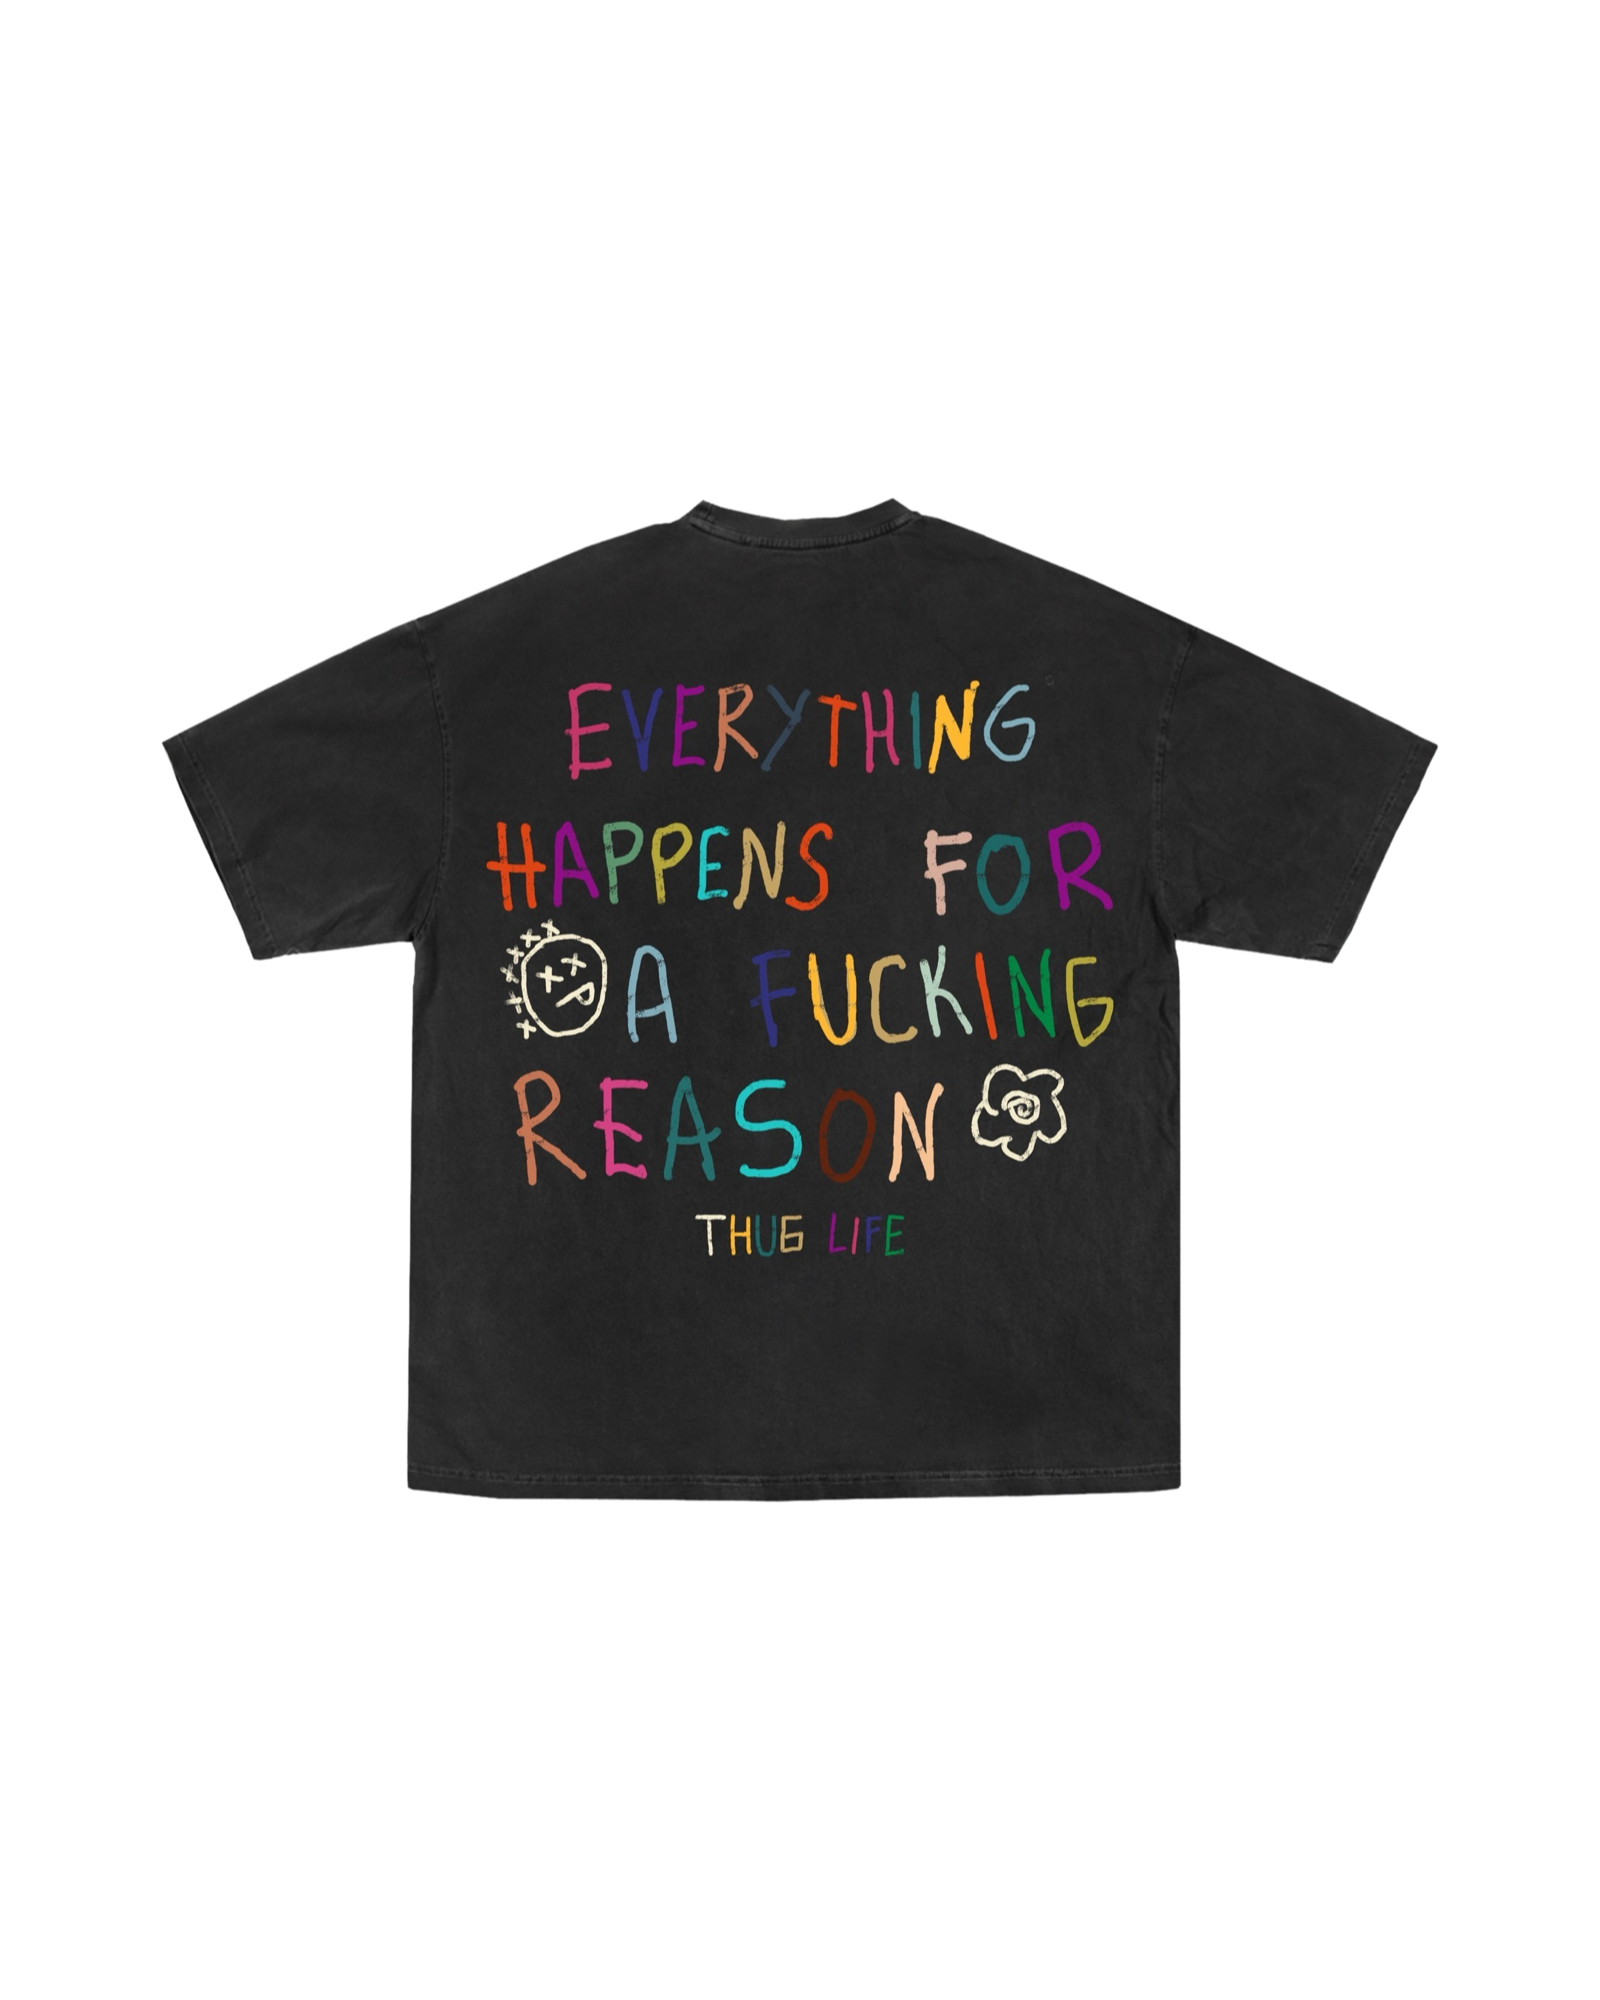 'Everything Happens For A Reason' Tee